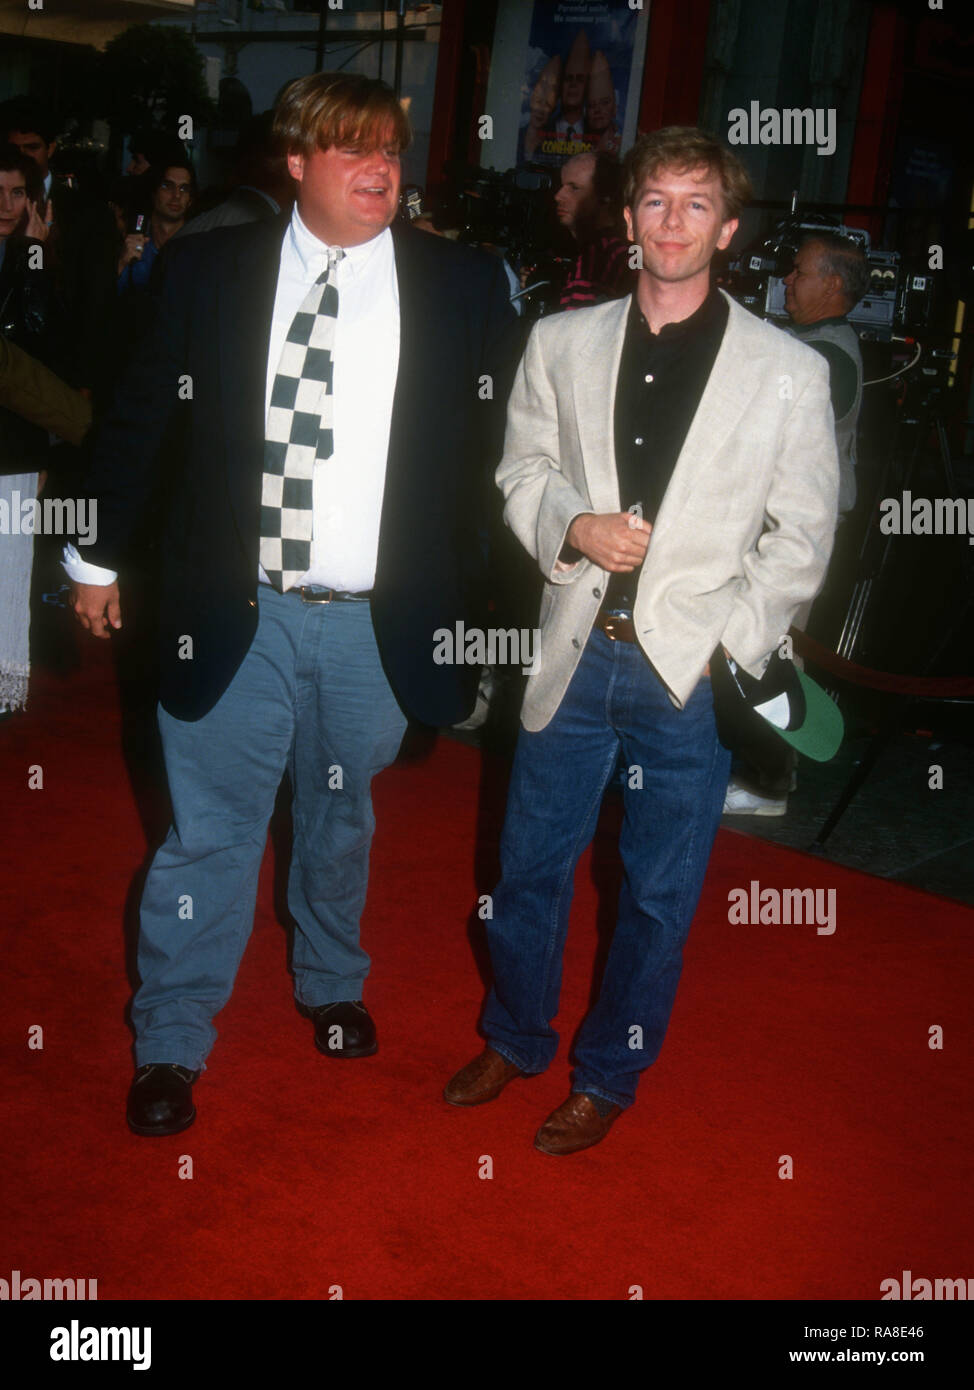 HOLLYWOOD, CA - JULY 19: Actor Chris Farley and actor David Spade attend Paramount Pictures' 'Coneheads' Premiere on July 19, 1993 at Mann Chinese Theatre in Hollywood, California. Photo by Barry King/Alamy Stock Photo Stock Photo